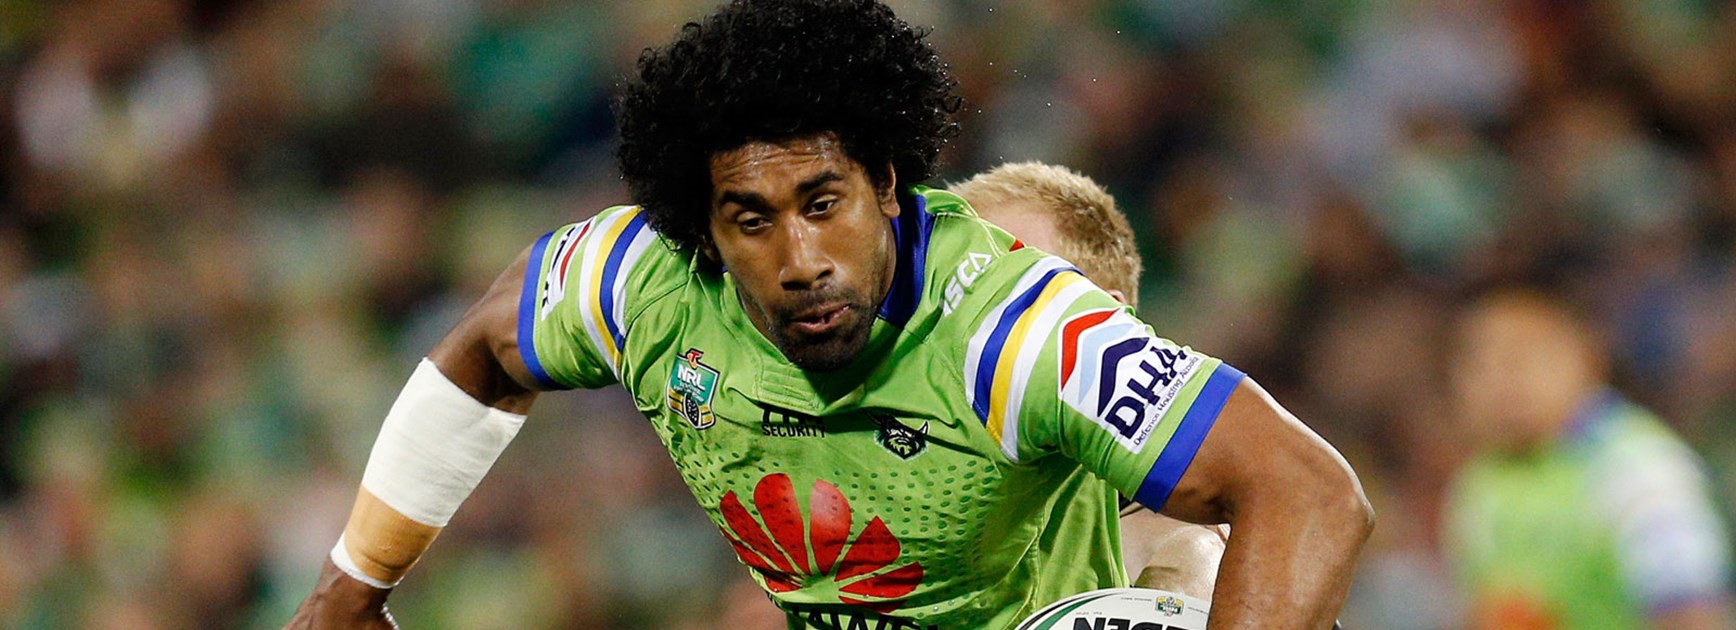 Sia Soliola against the Panthers in Week 2 of the NRL Finals.